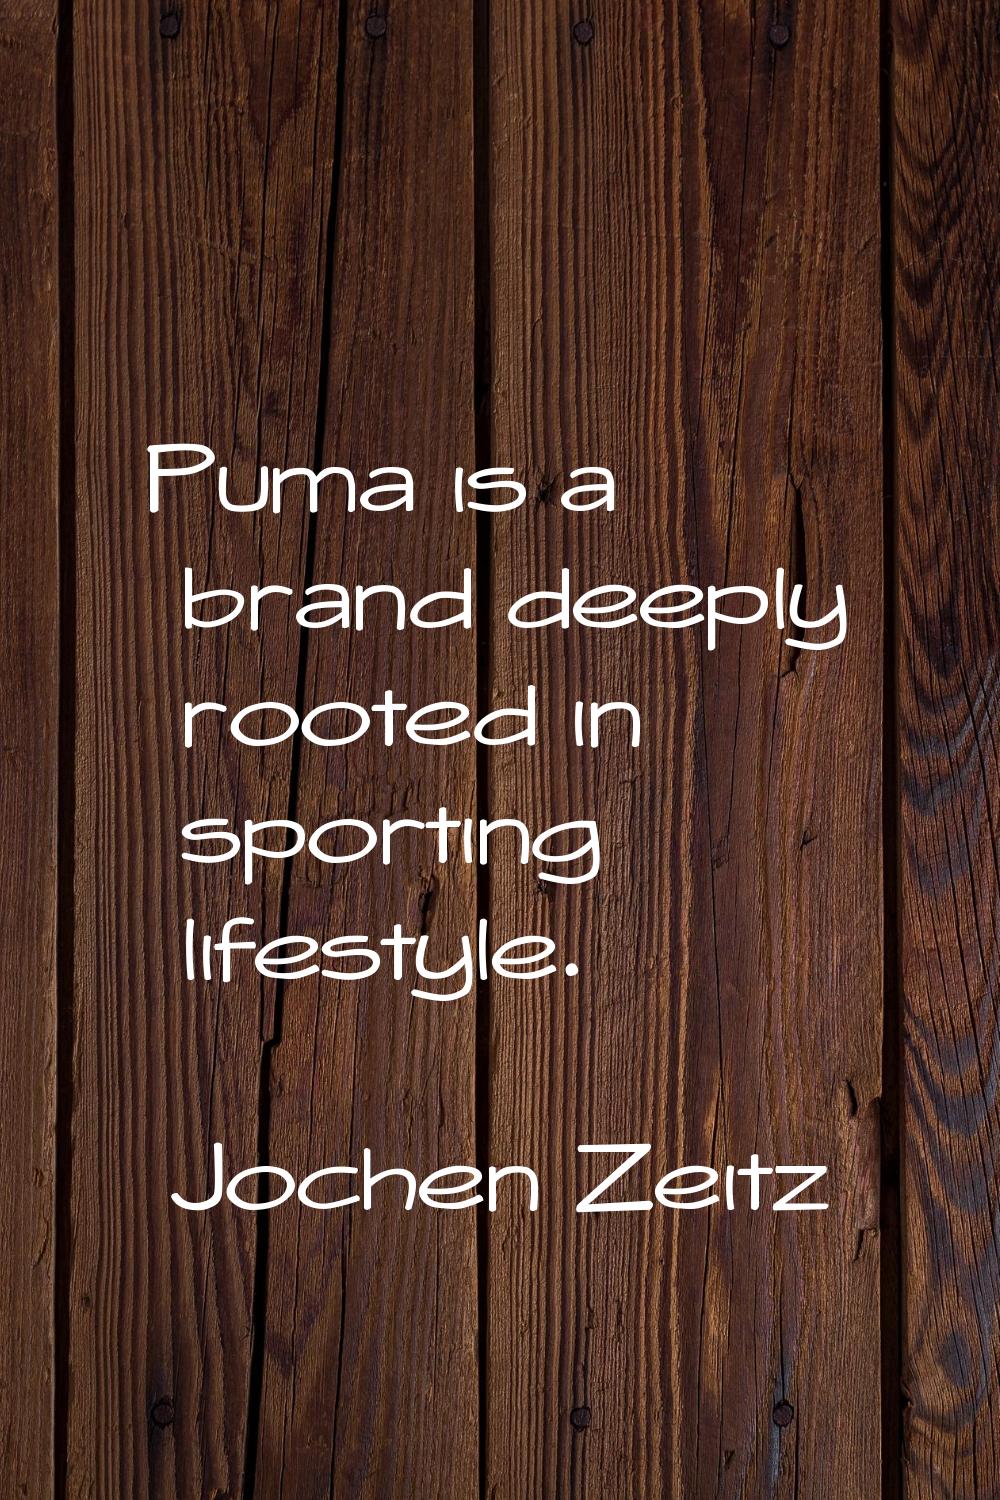 Puma is a brand deeply rooted in sporting lifestyle.